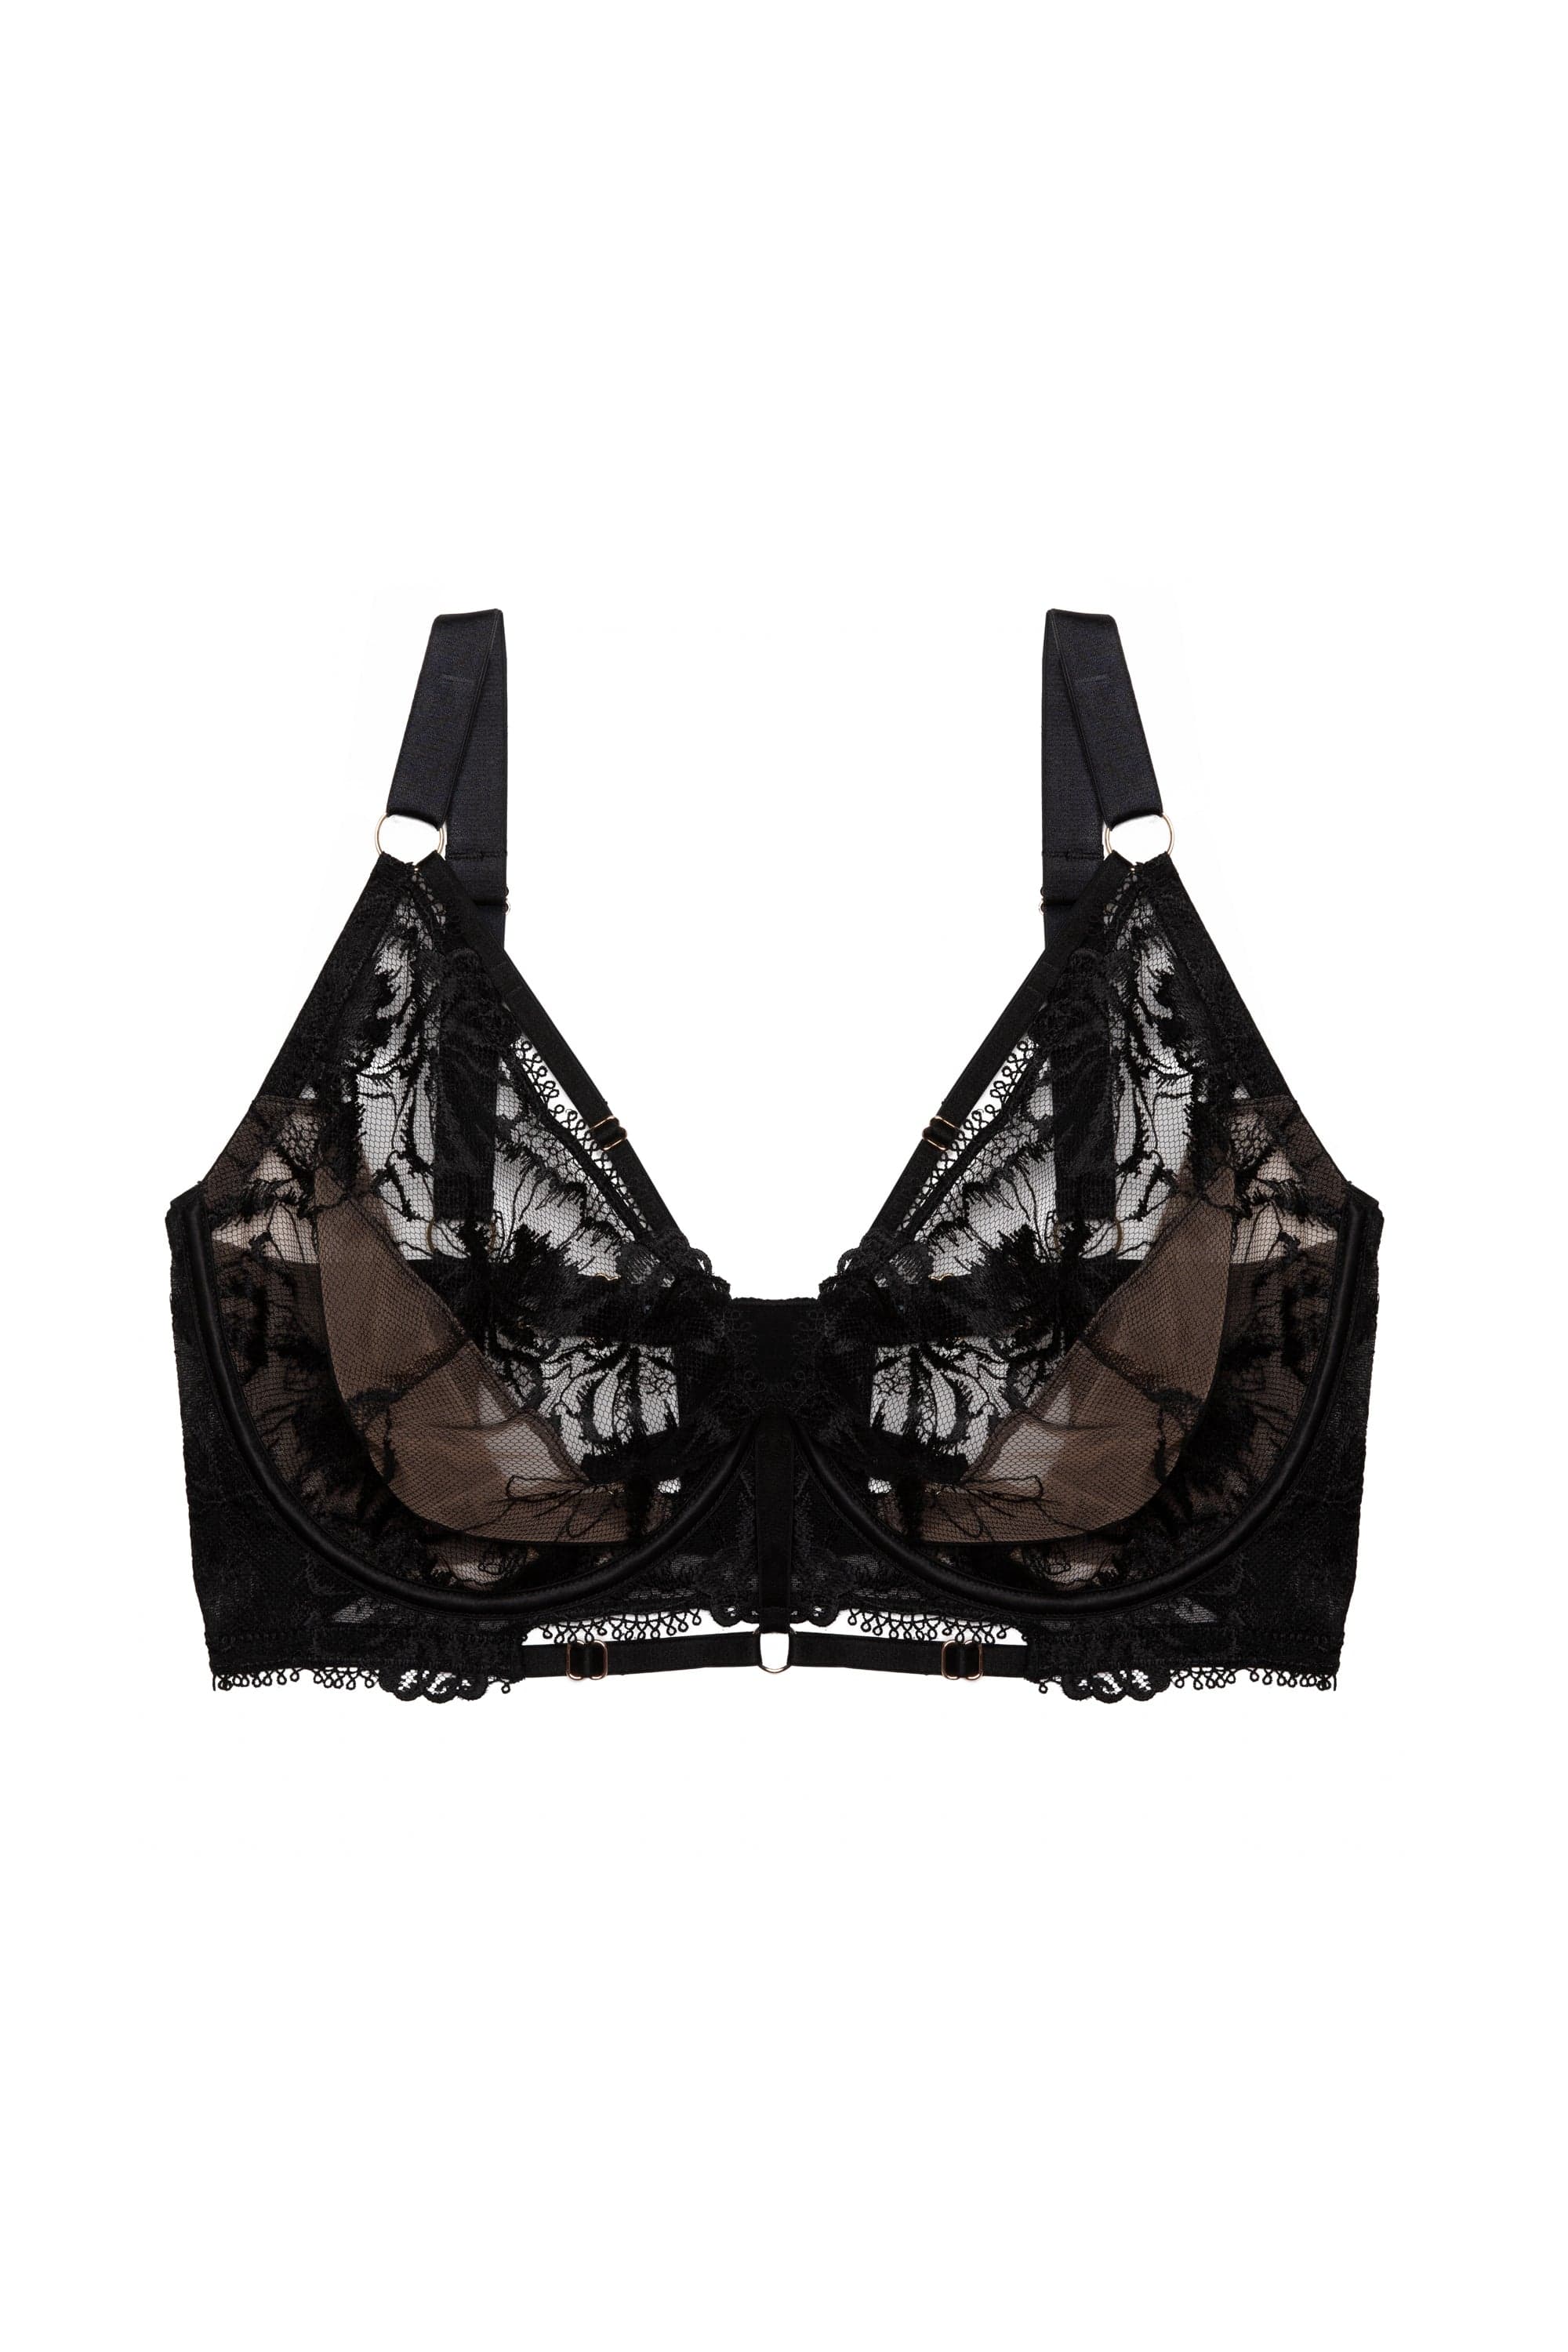 Buy online Black Embellished Plunge Bra from lingerie for Women by  Prettycat for ₹529 at 52% off